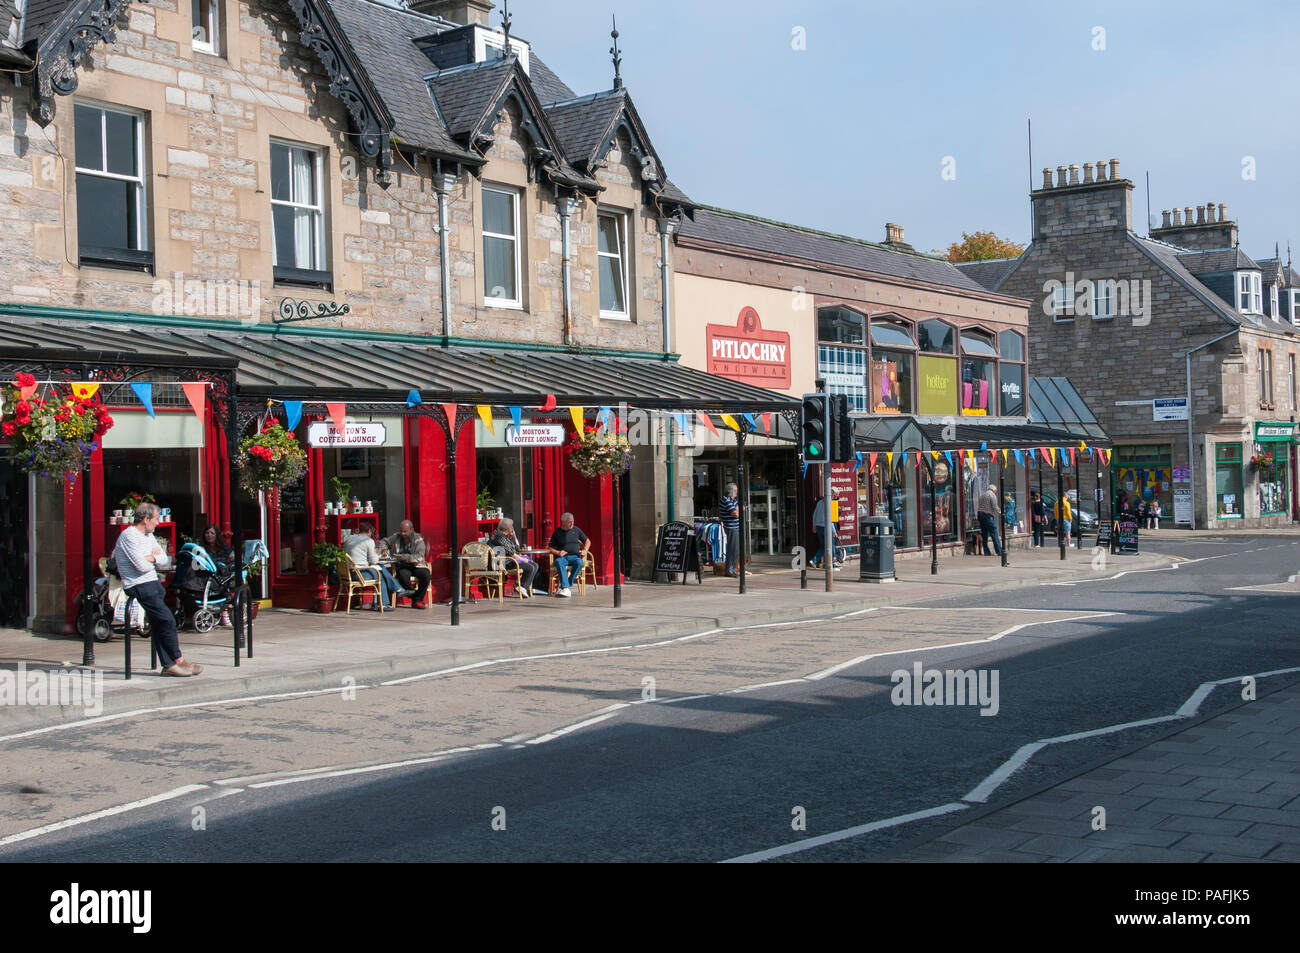 The busy main street with its mainly Victorian stone style buildings of shops, hotels, cafes, has an unusual period cast-iron canopy over one side Stock Photo